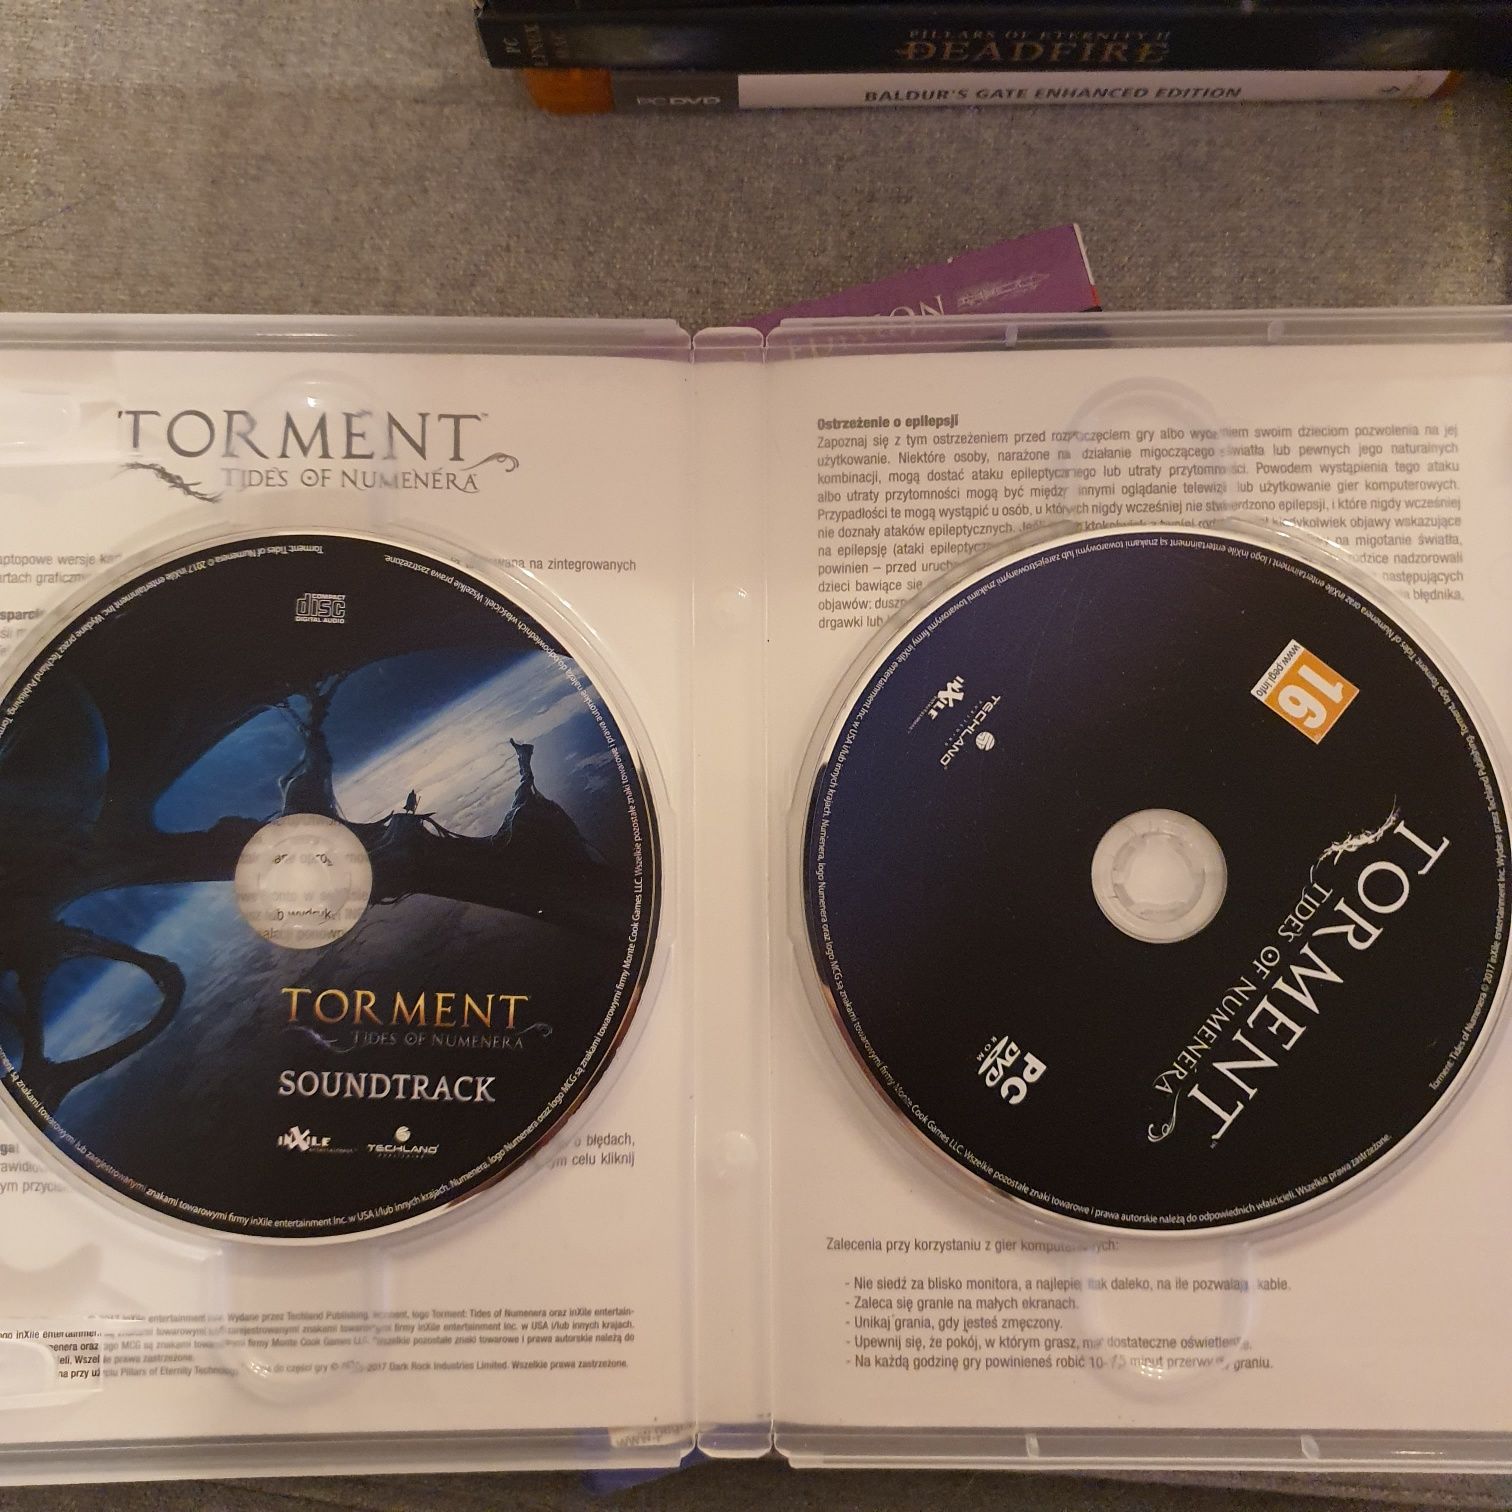 Torment Tides of Numenera PC DVD day one edition